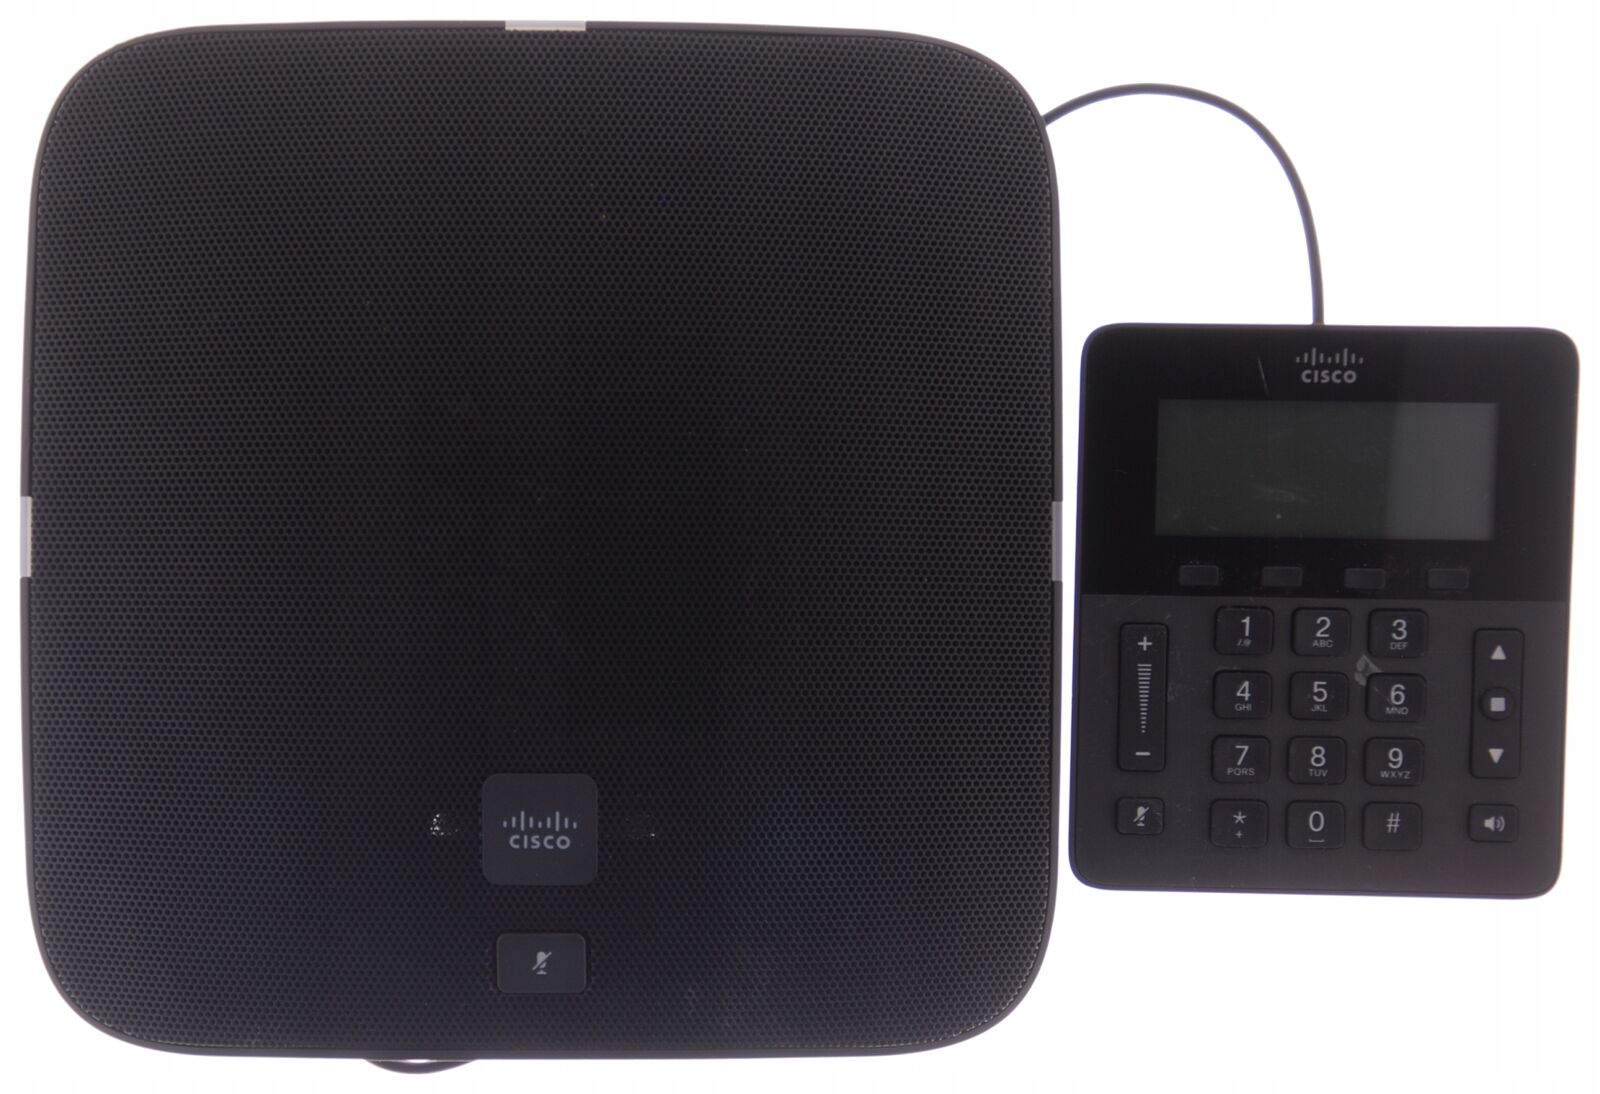 Cisco CP-8831 conference phone + VoIP panel